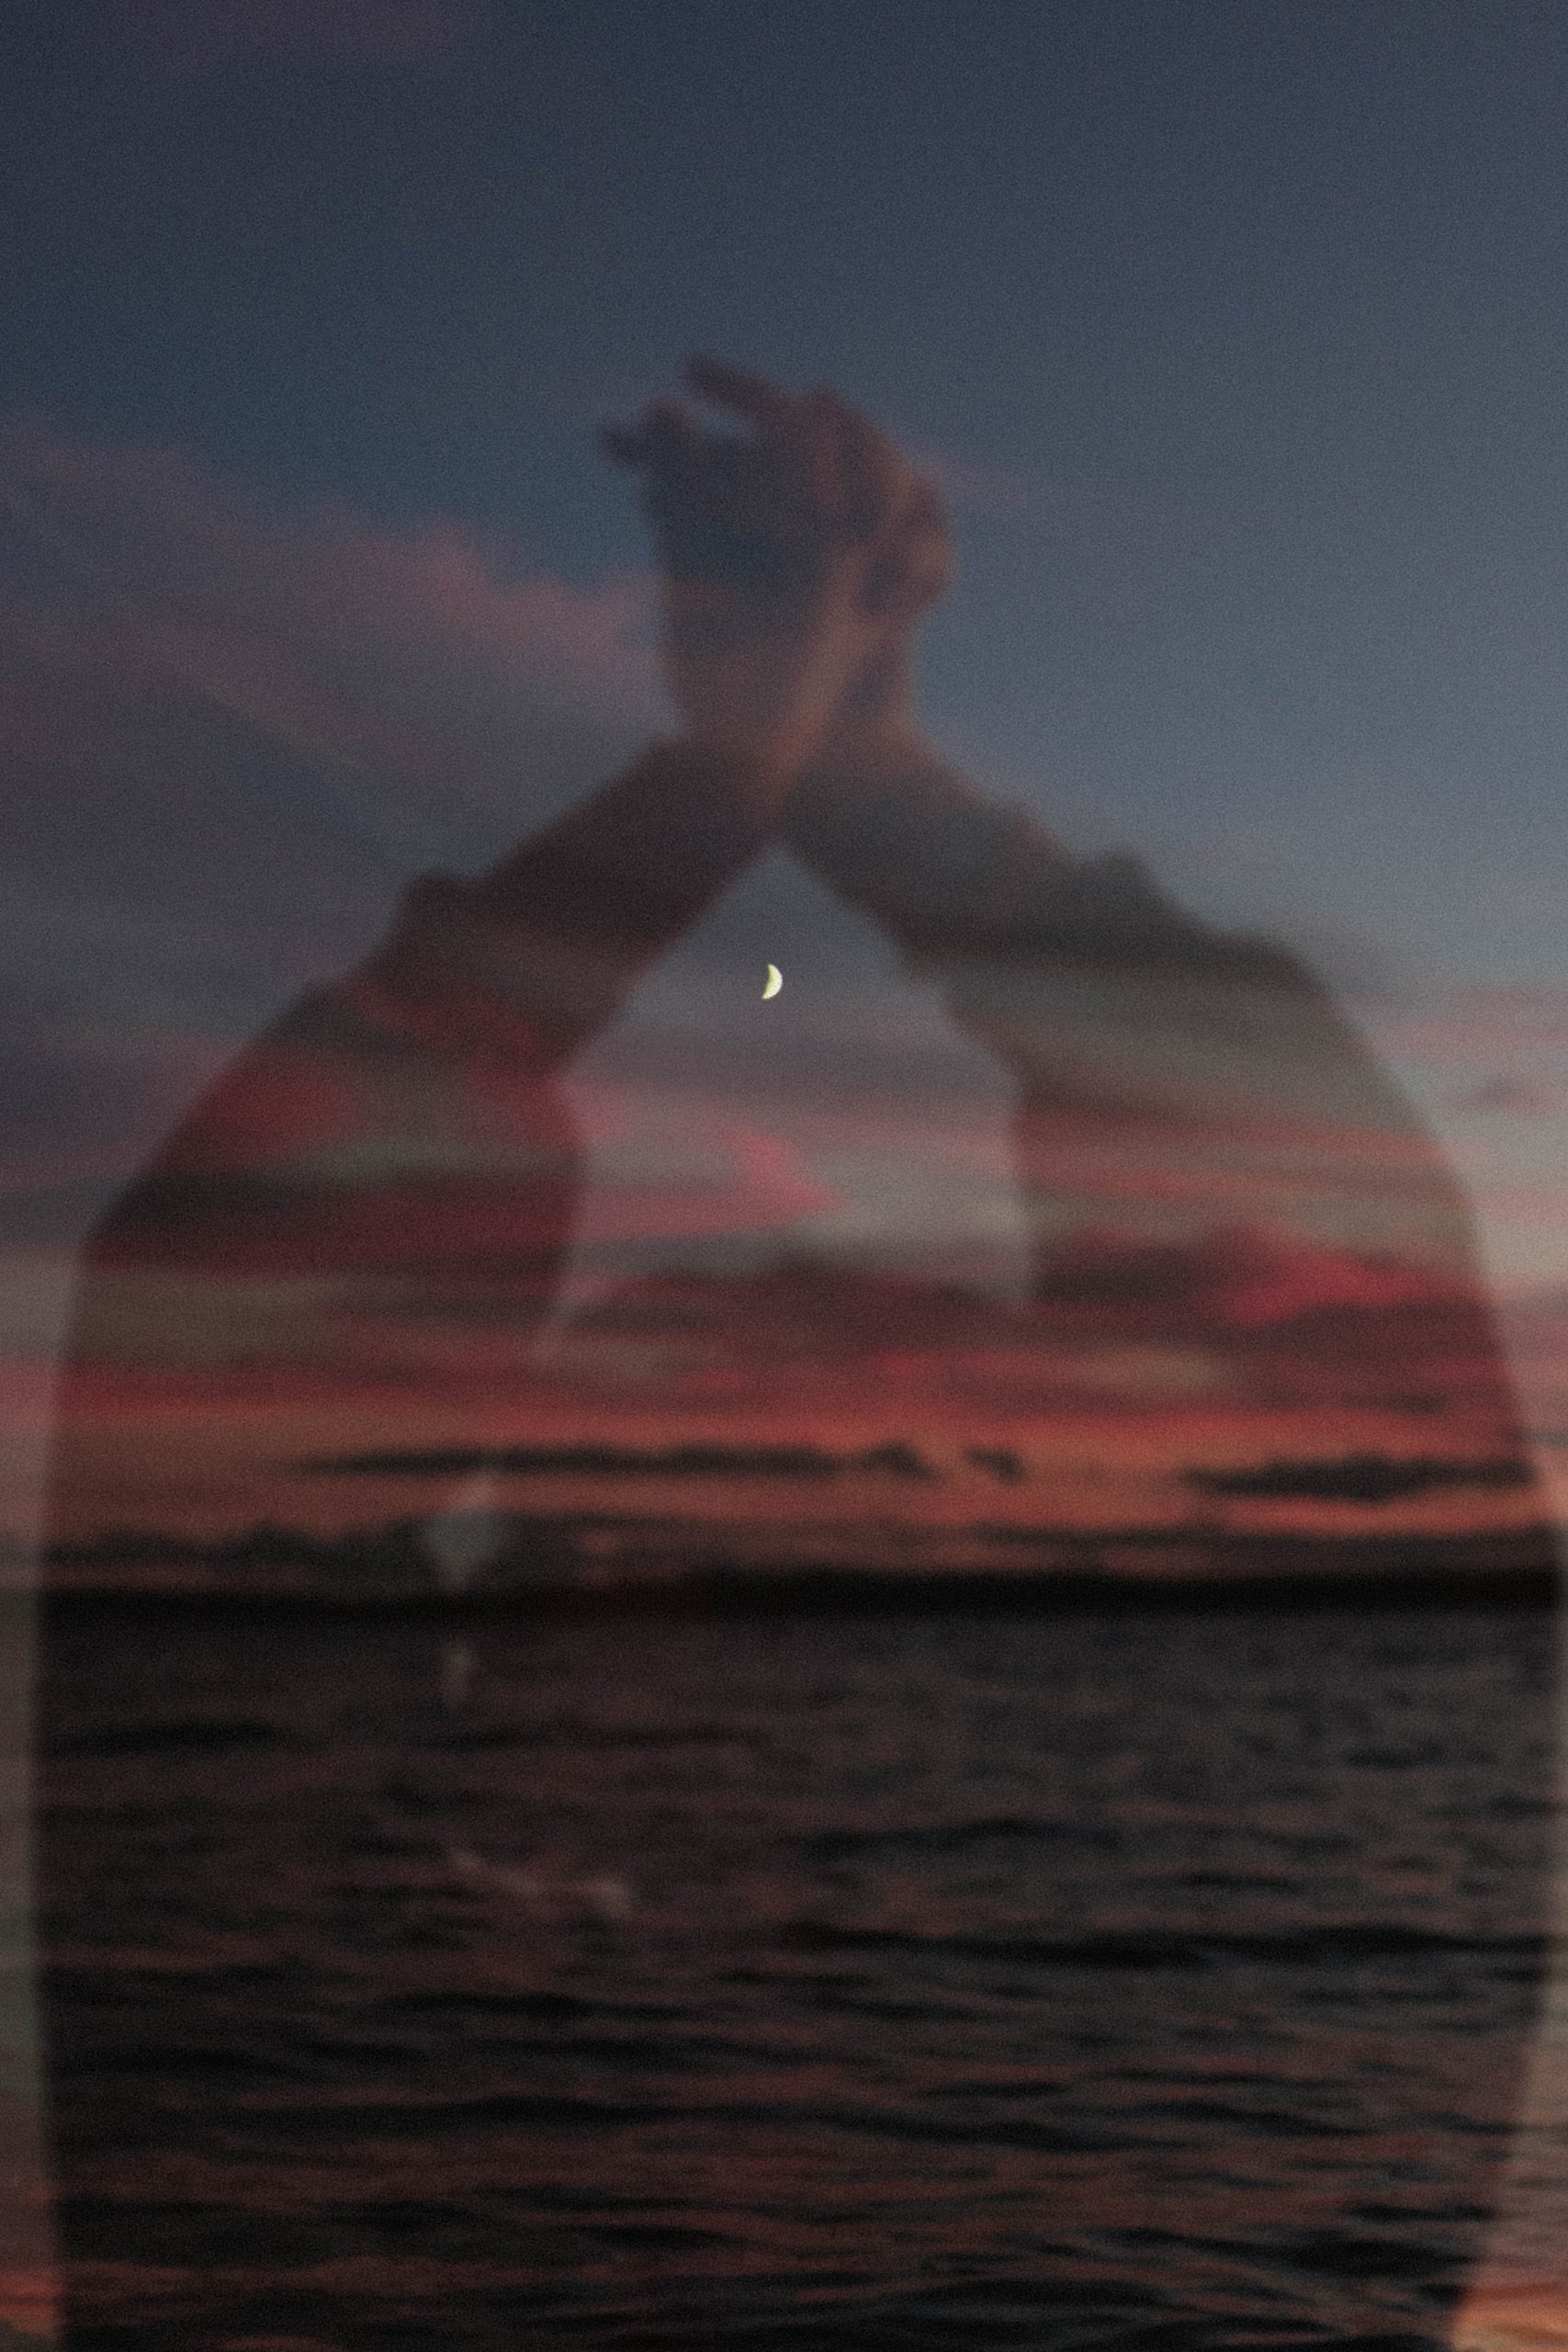 Image of a person's silhouette over a sunset - the worst person in the world